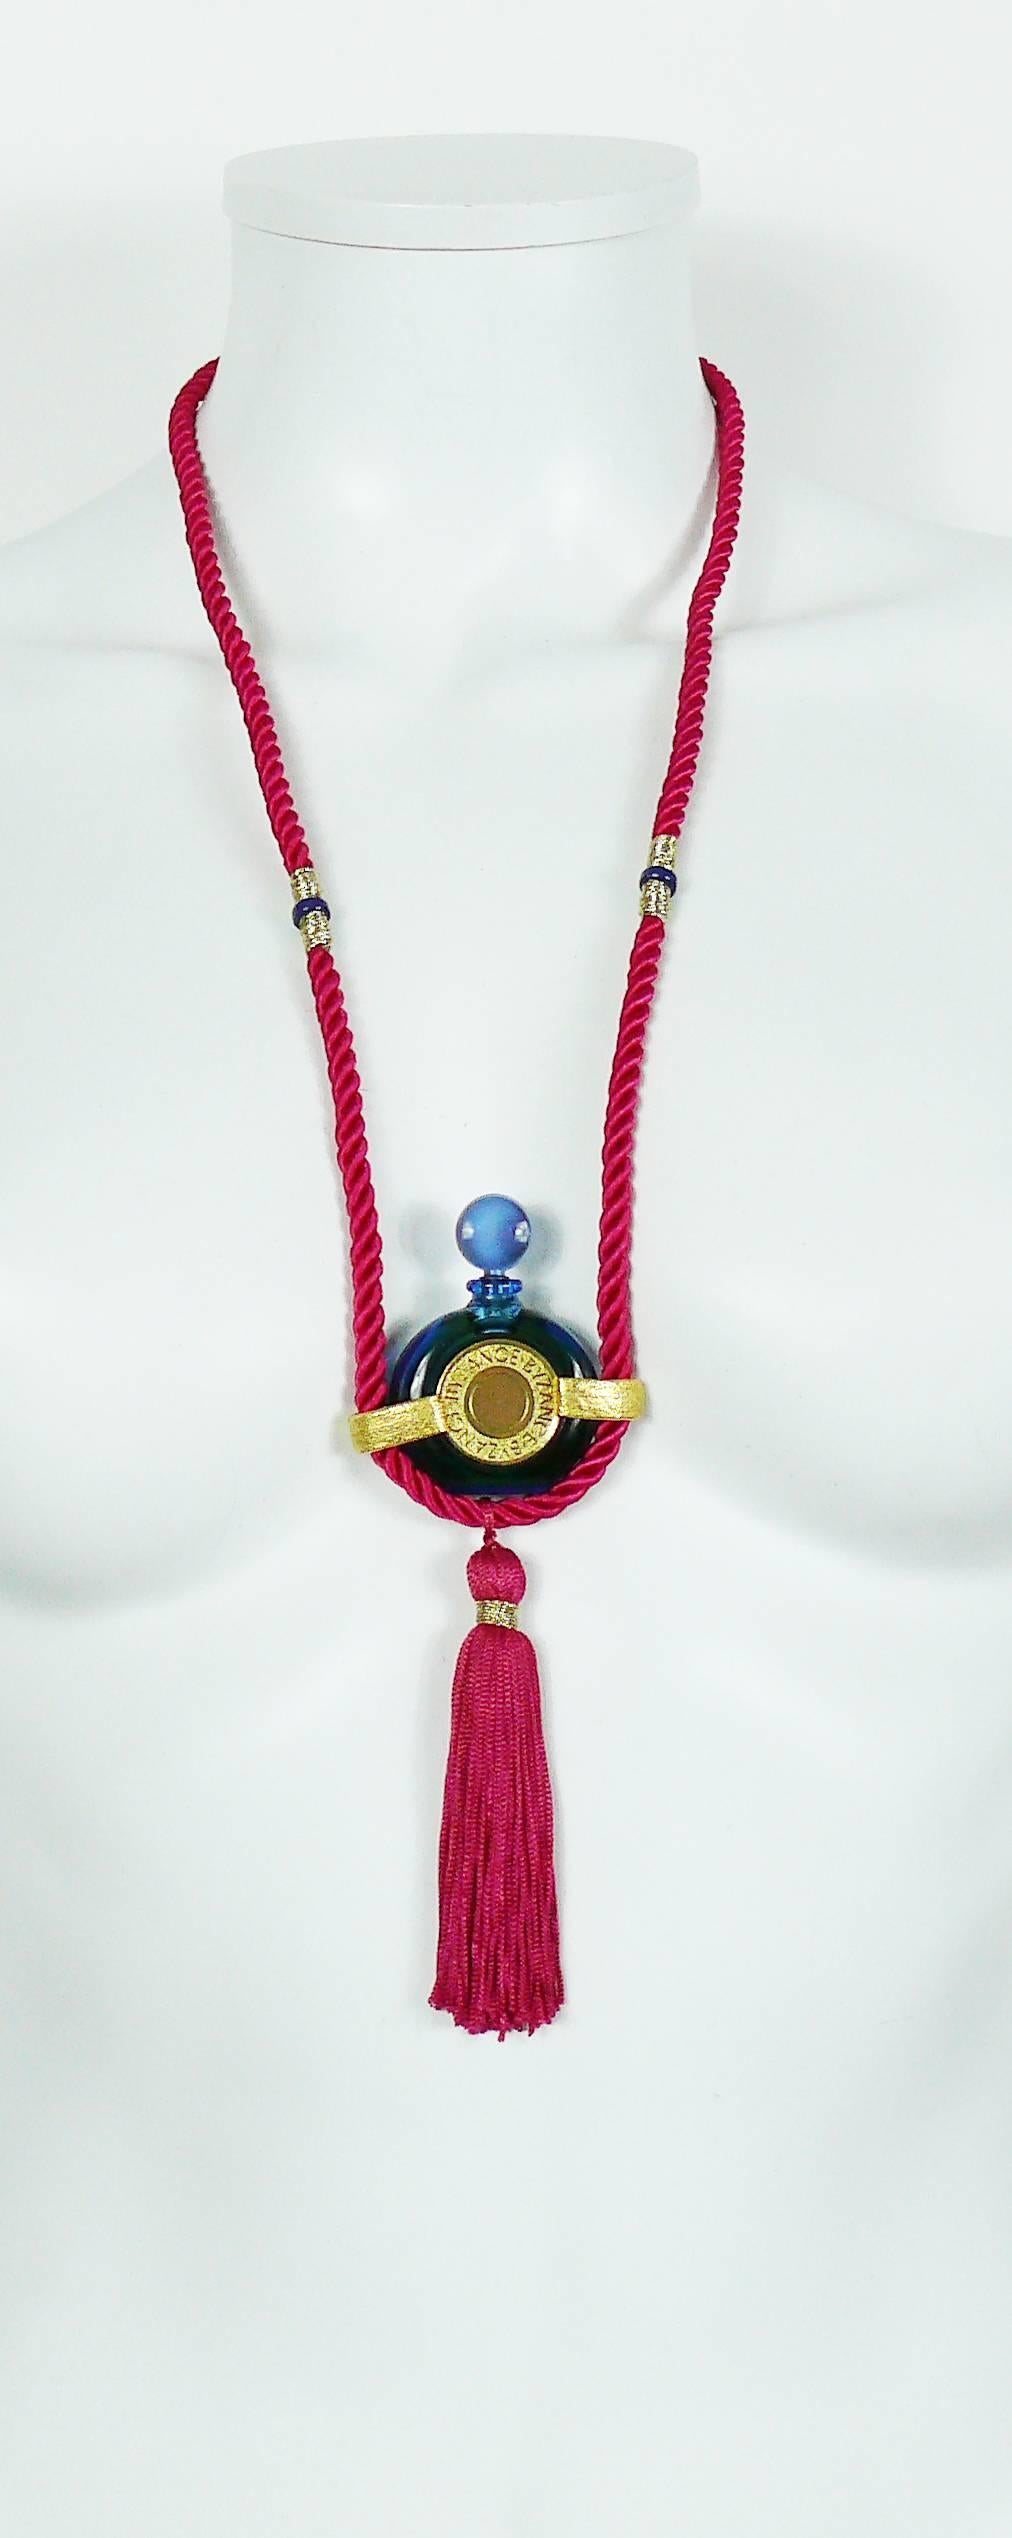 ROCHAS vintage BYZANCE tassel blue miniature bottle necklace featuring gold toned hardware and fuchsia pink cord strap with tassel hanging at the bottom.

Bottle still have perfume inside (looks full and unused).

Marked  BYZANCE on bottle